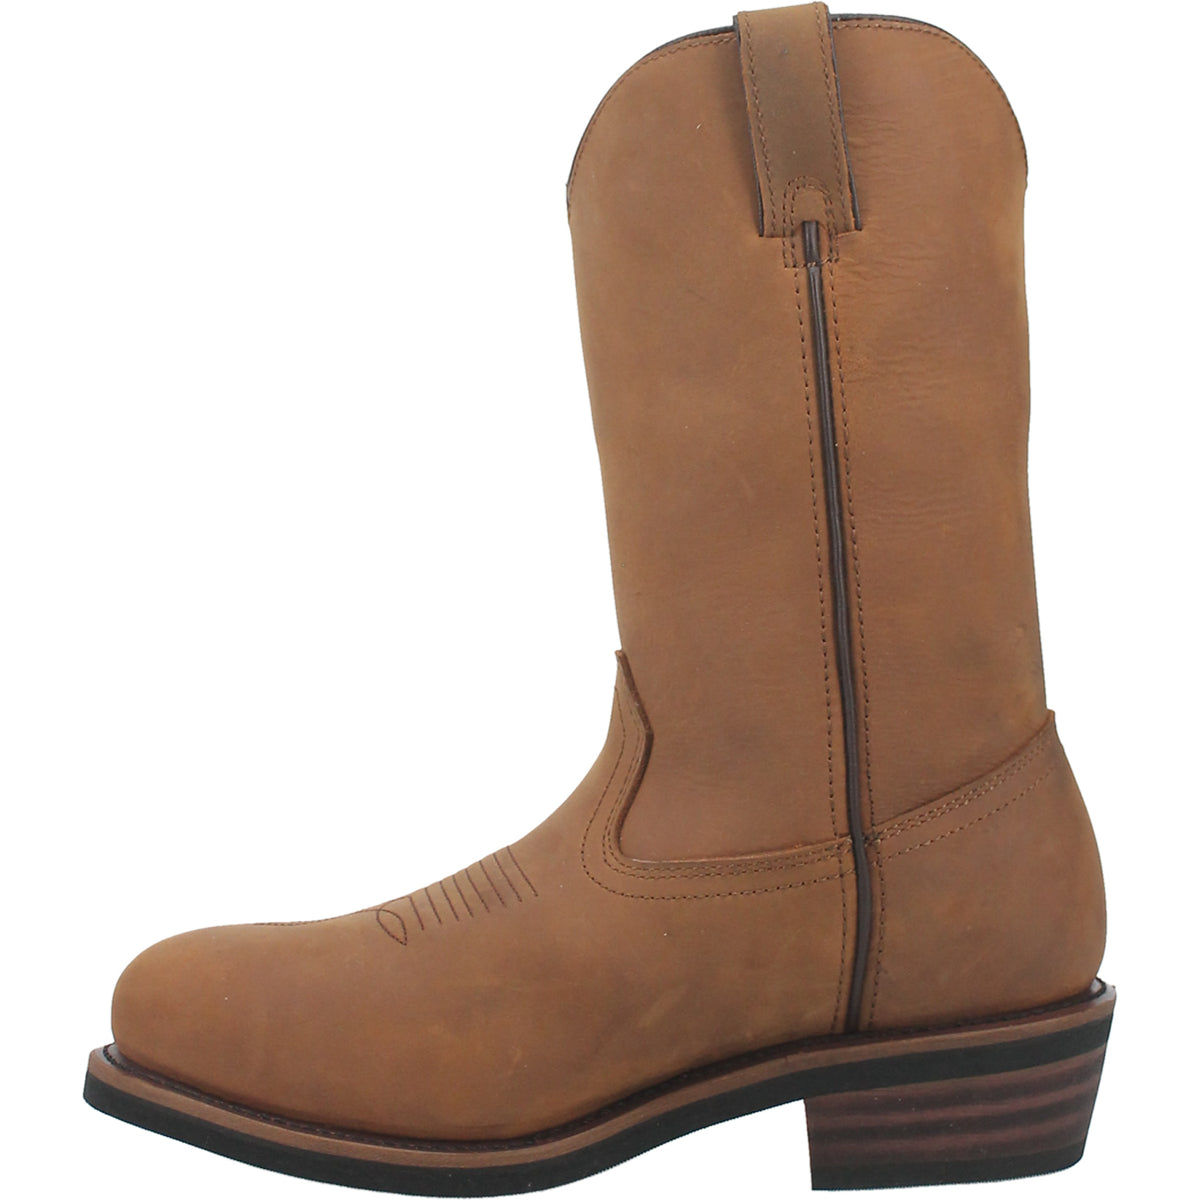 ALBUQUERQUE WATERPROOF LEATHER BOOT Cover